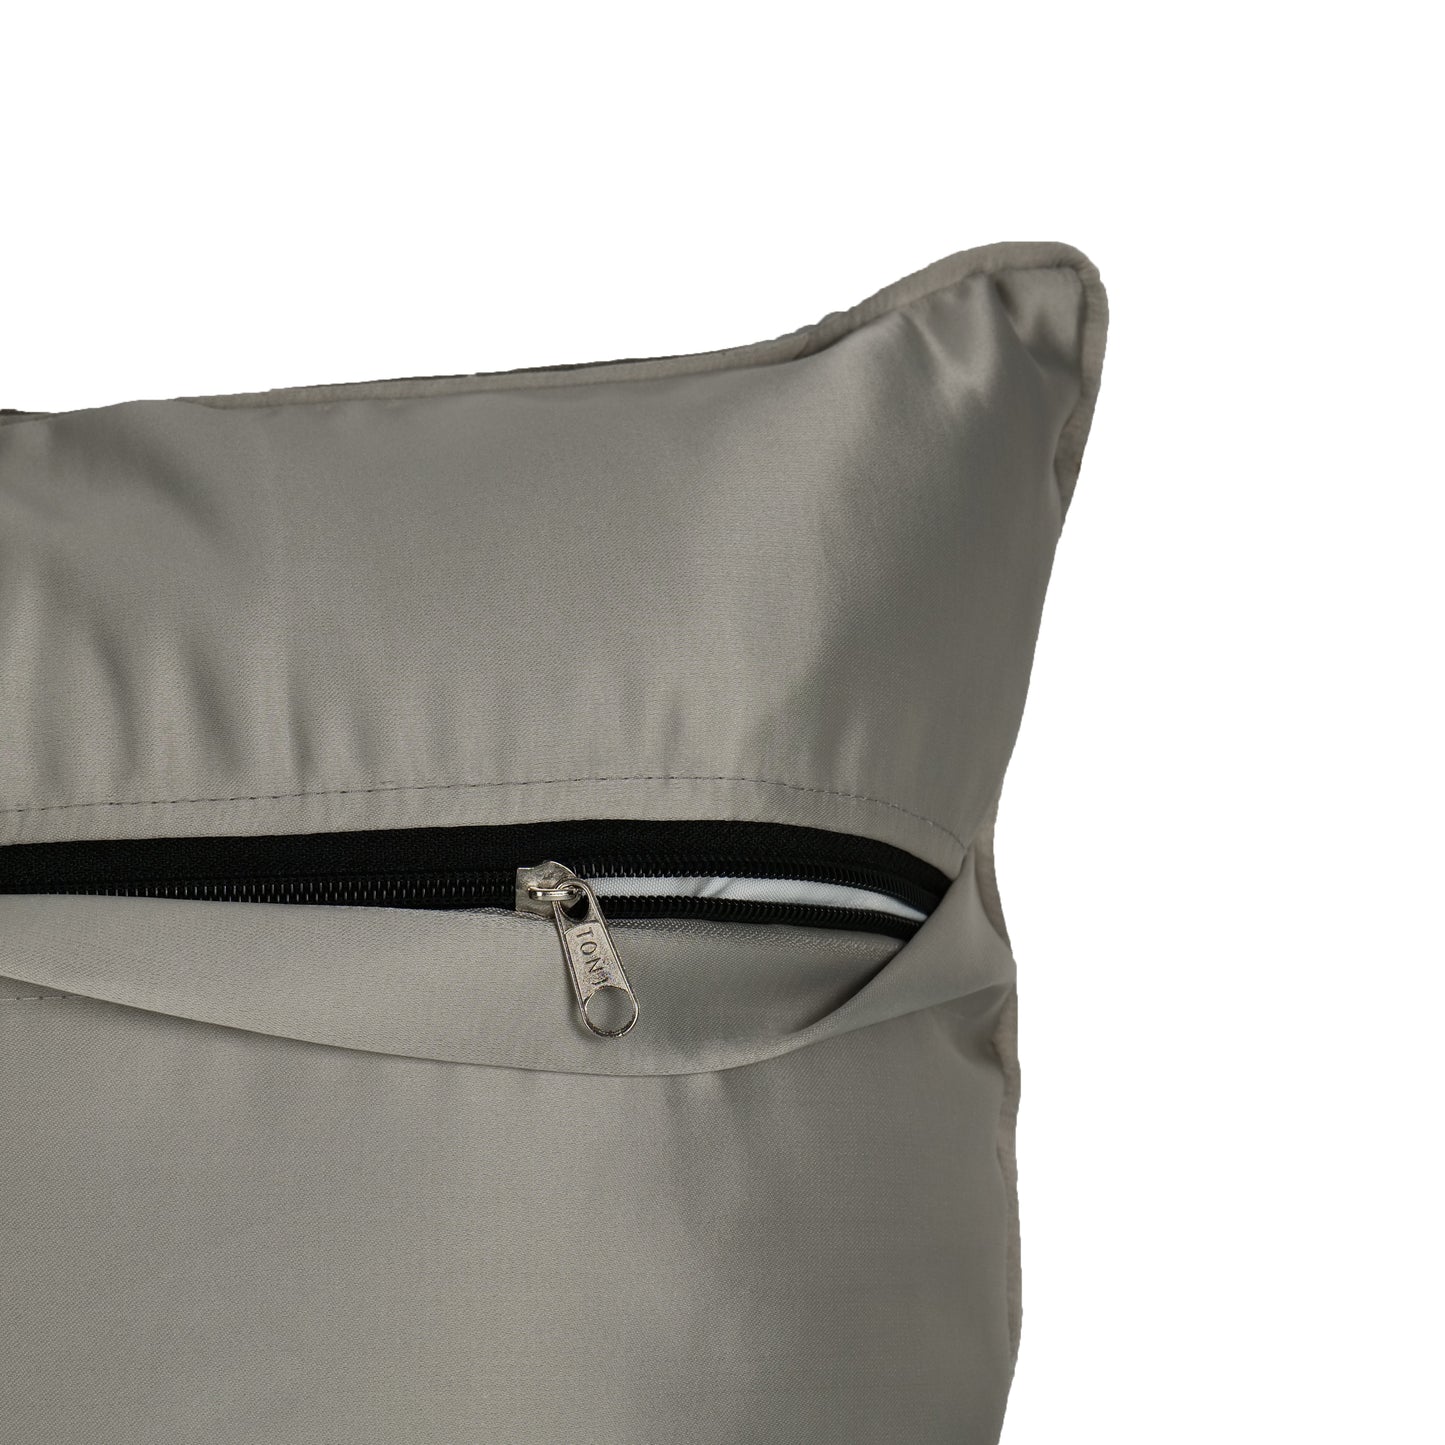 'Grey Snugs' Solid Linen Cushion Cover Piping (16 x 16 Inch)